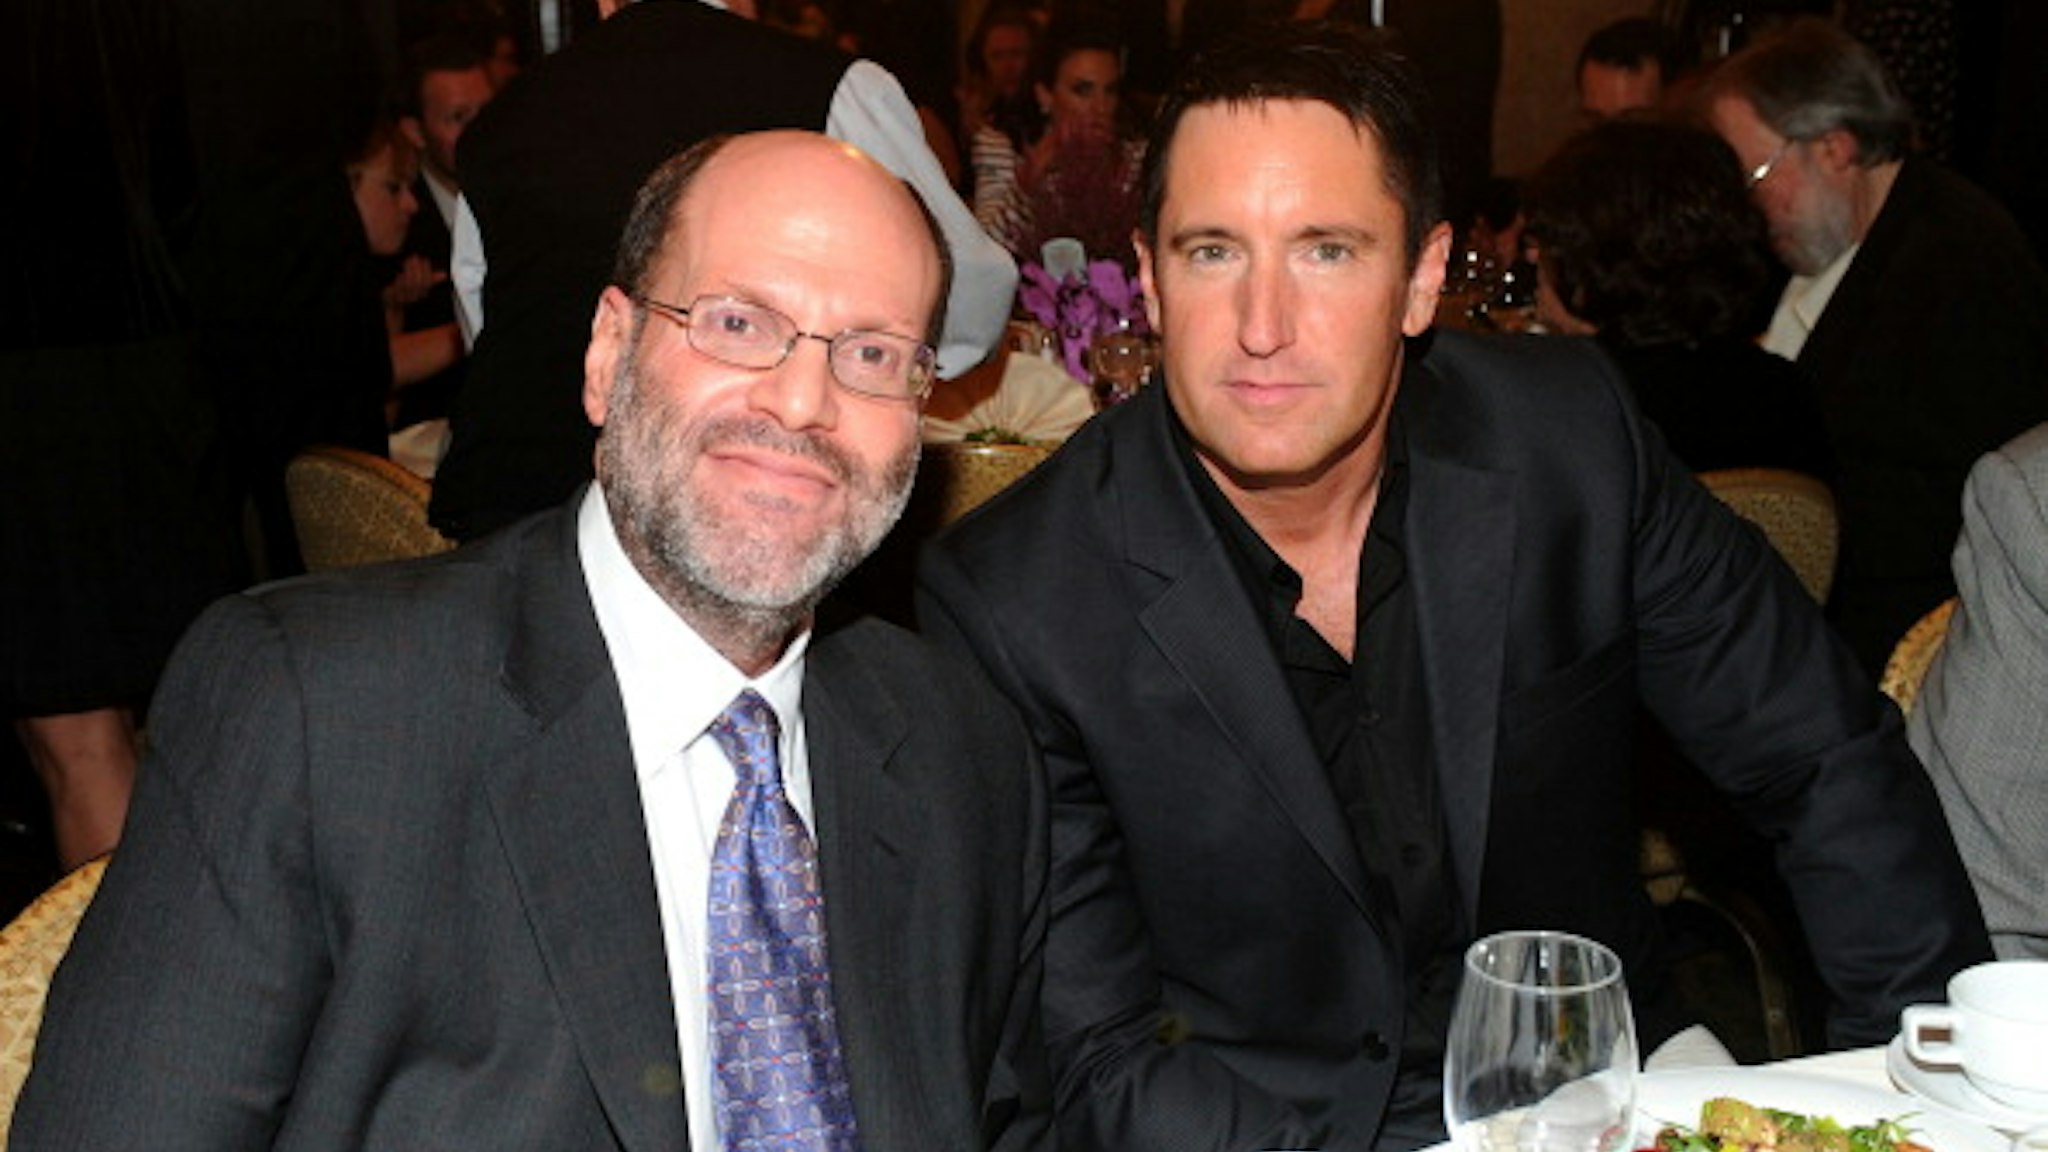 CENTURY CITY, CA - JANUARY 15: Producer Scott Rudin and composer Trent Reznor attend the 36th Annual Los Angeles Film Critics Association Awards at the InterContinental Hotel on January 15, 2011 in Century City, California.